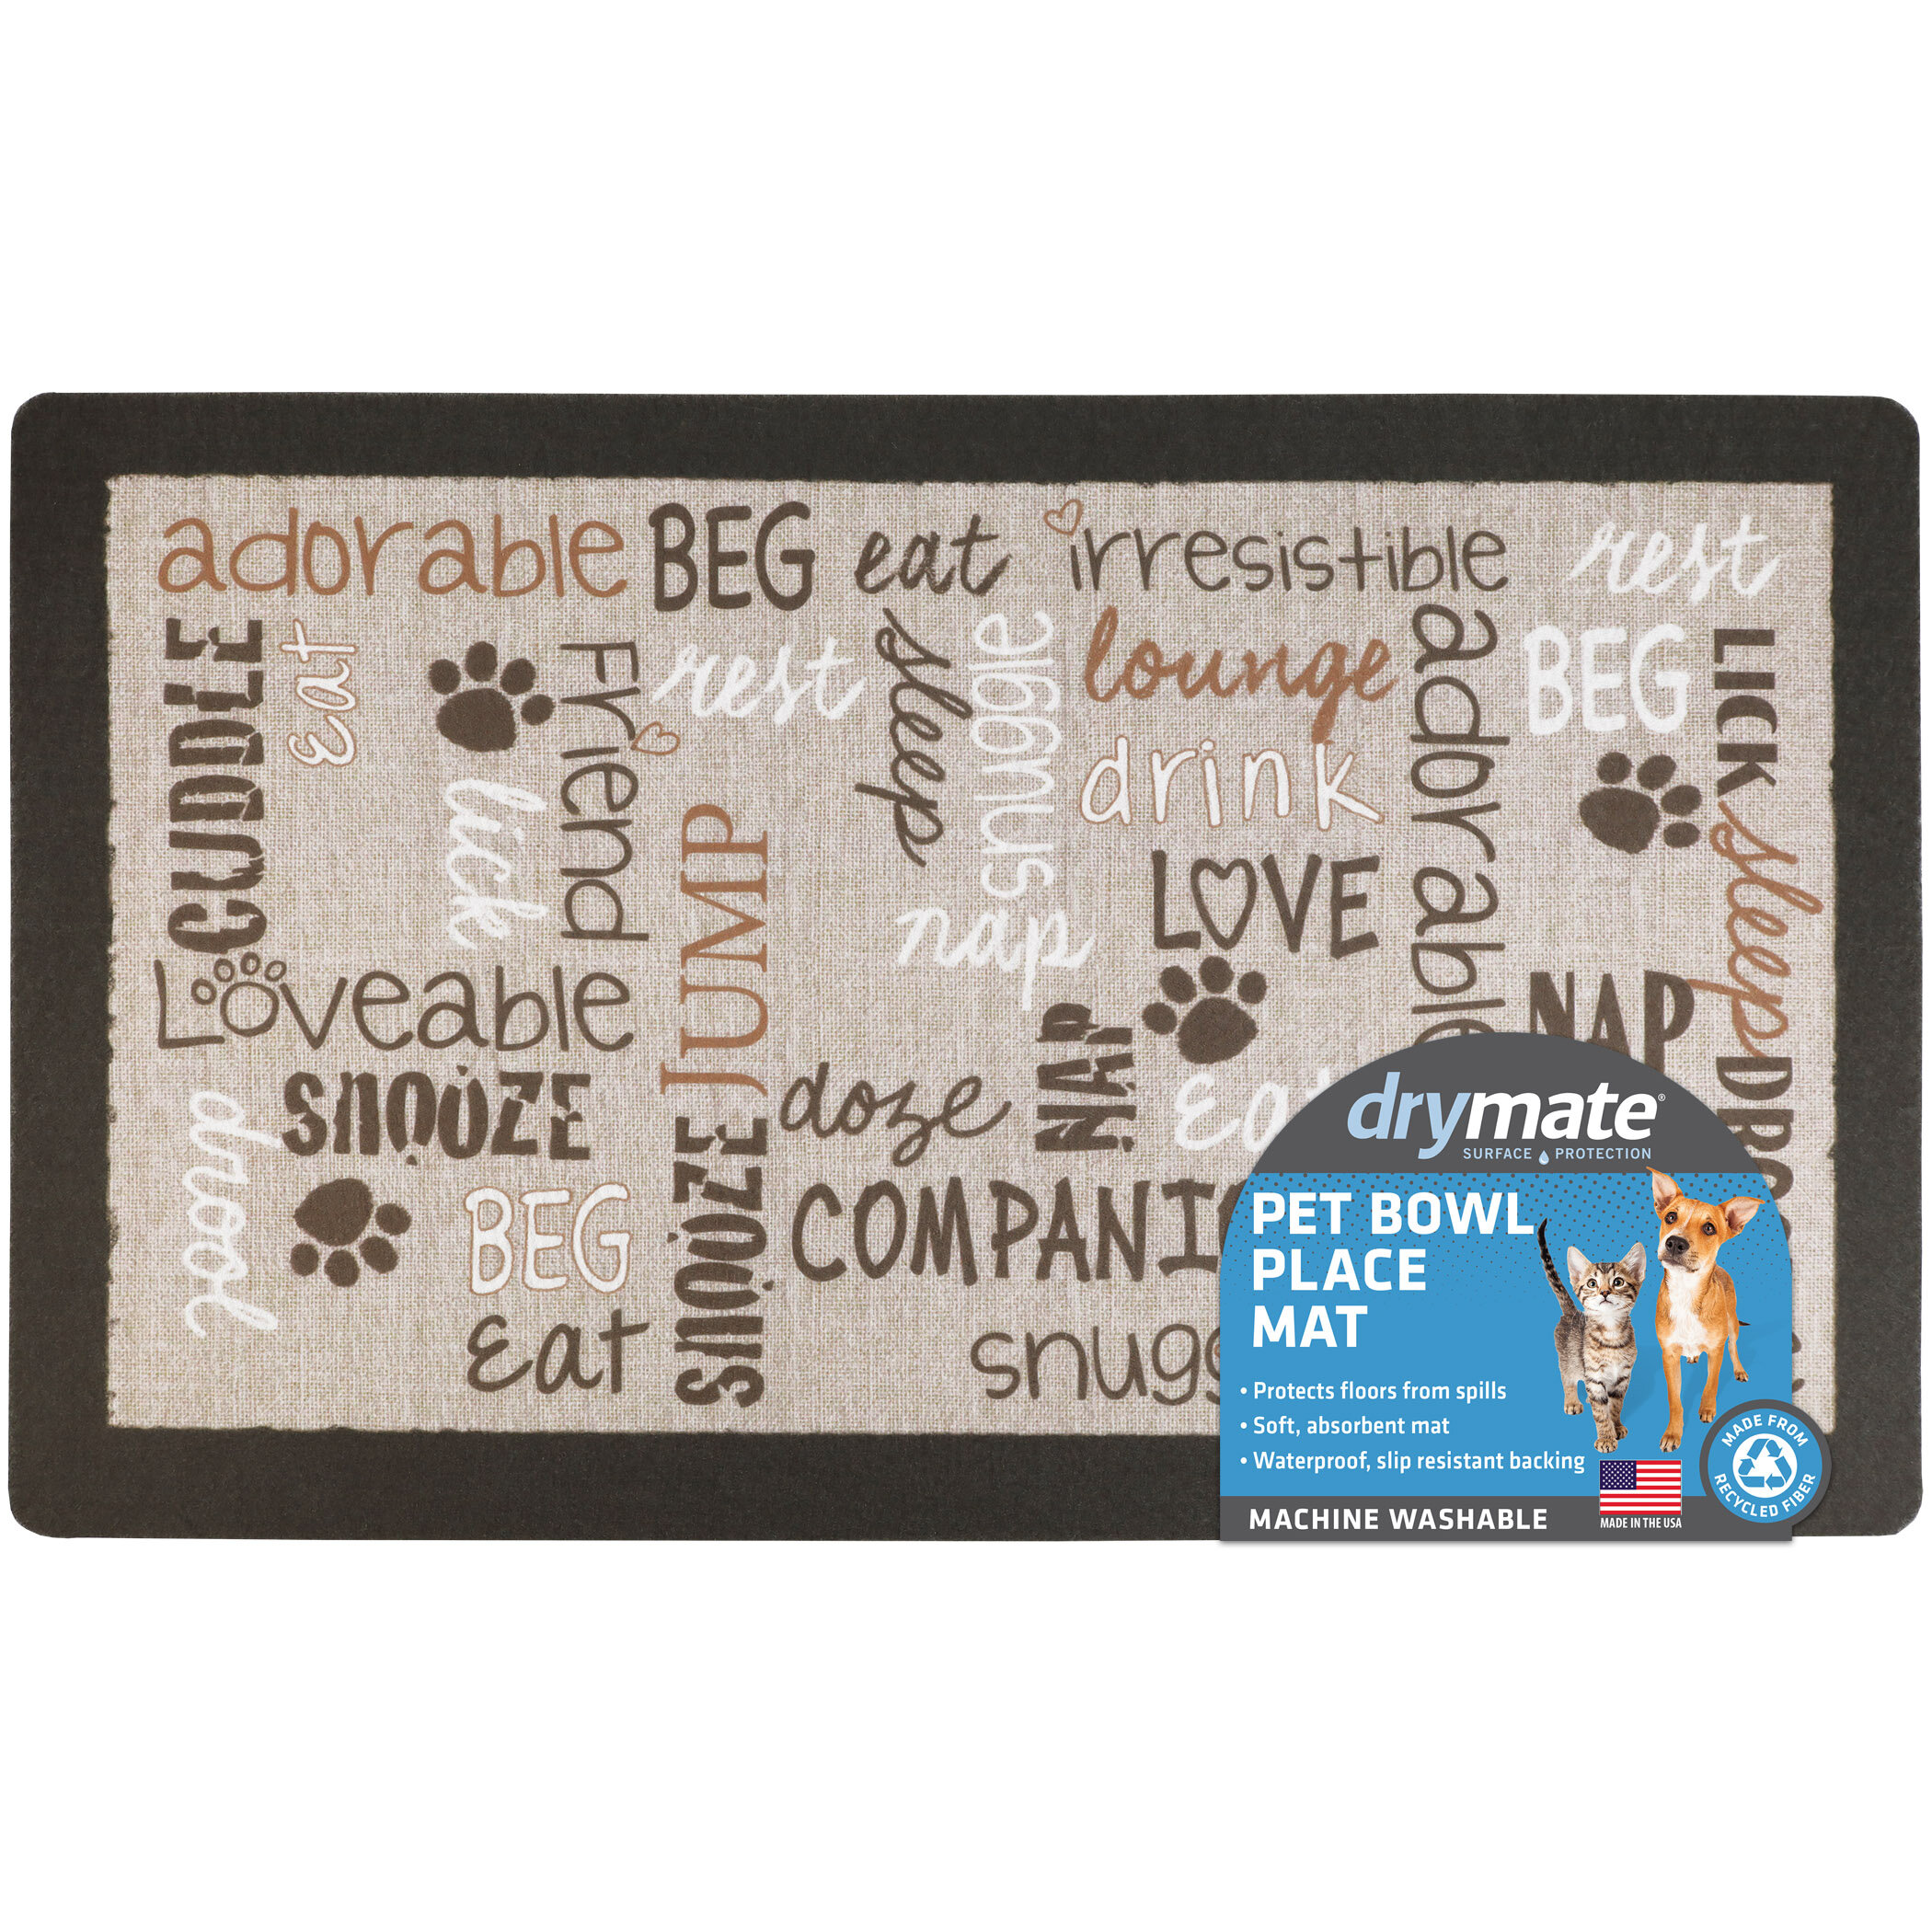 Silicone Dog Food Mat, Pet Placemat for Prevent Feeding Spills